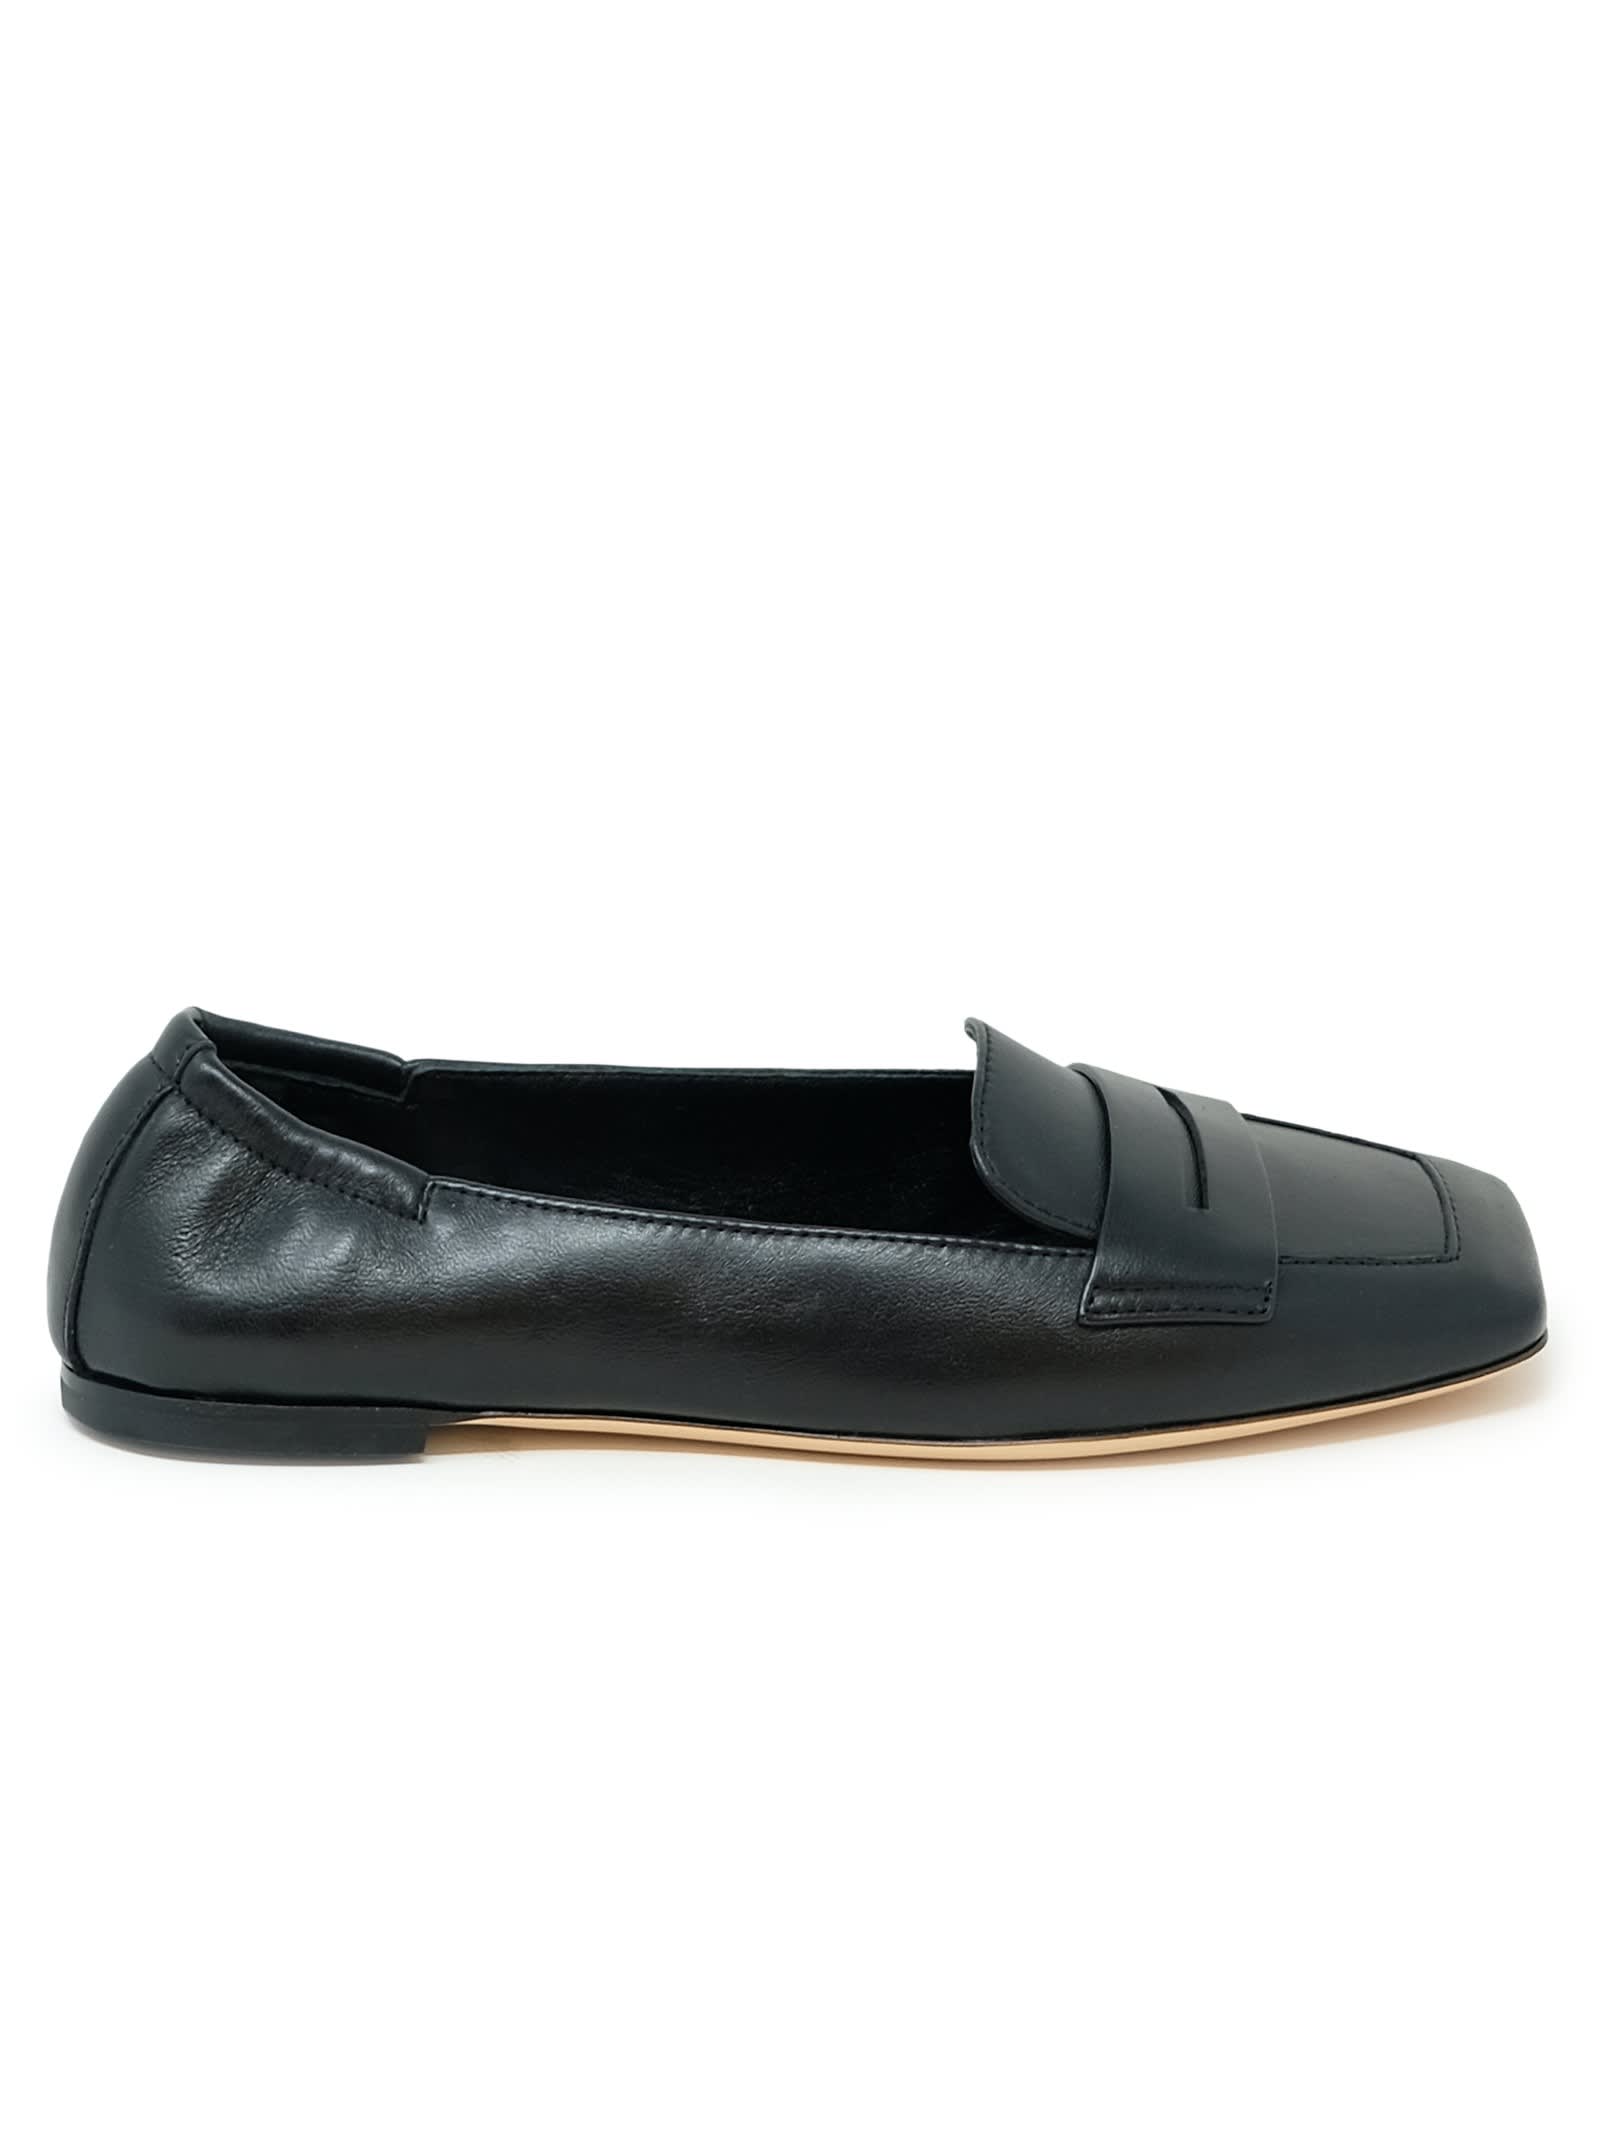 Black Leather Loafer Softy